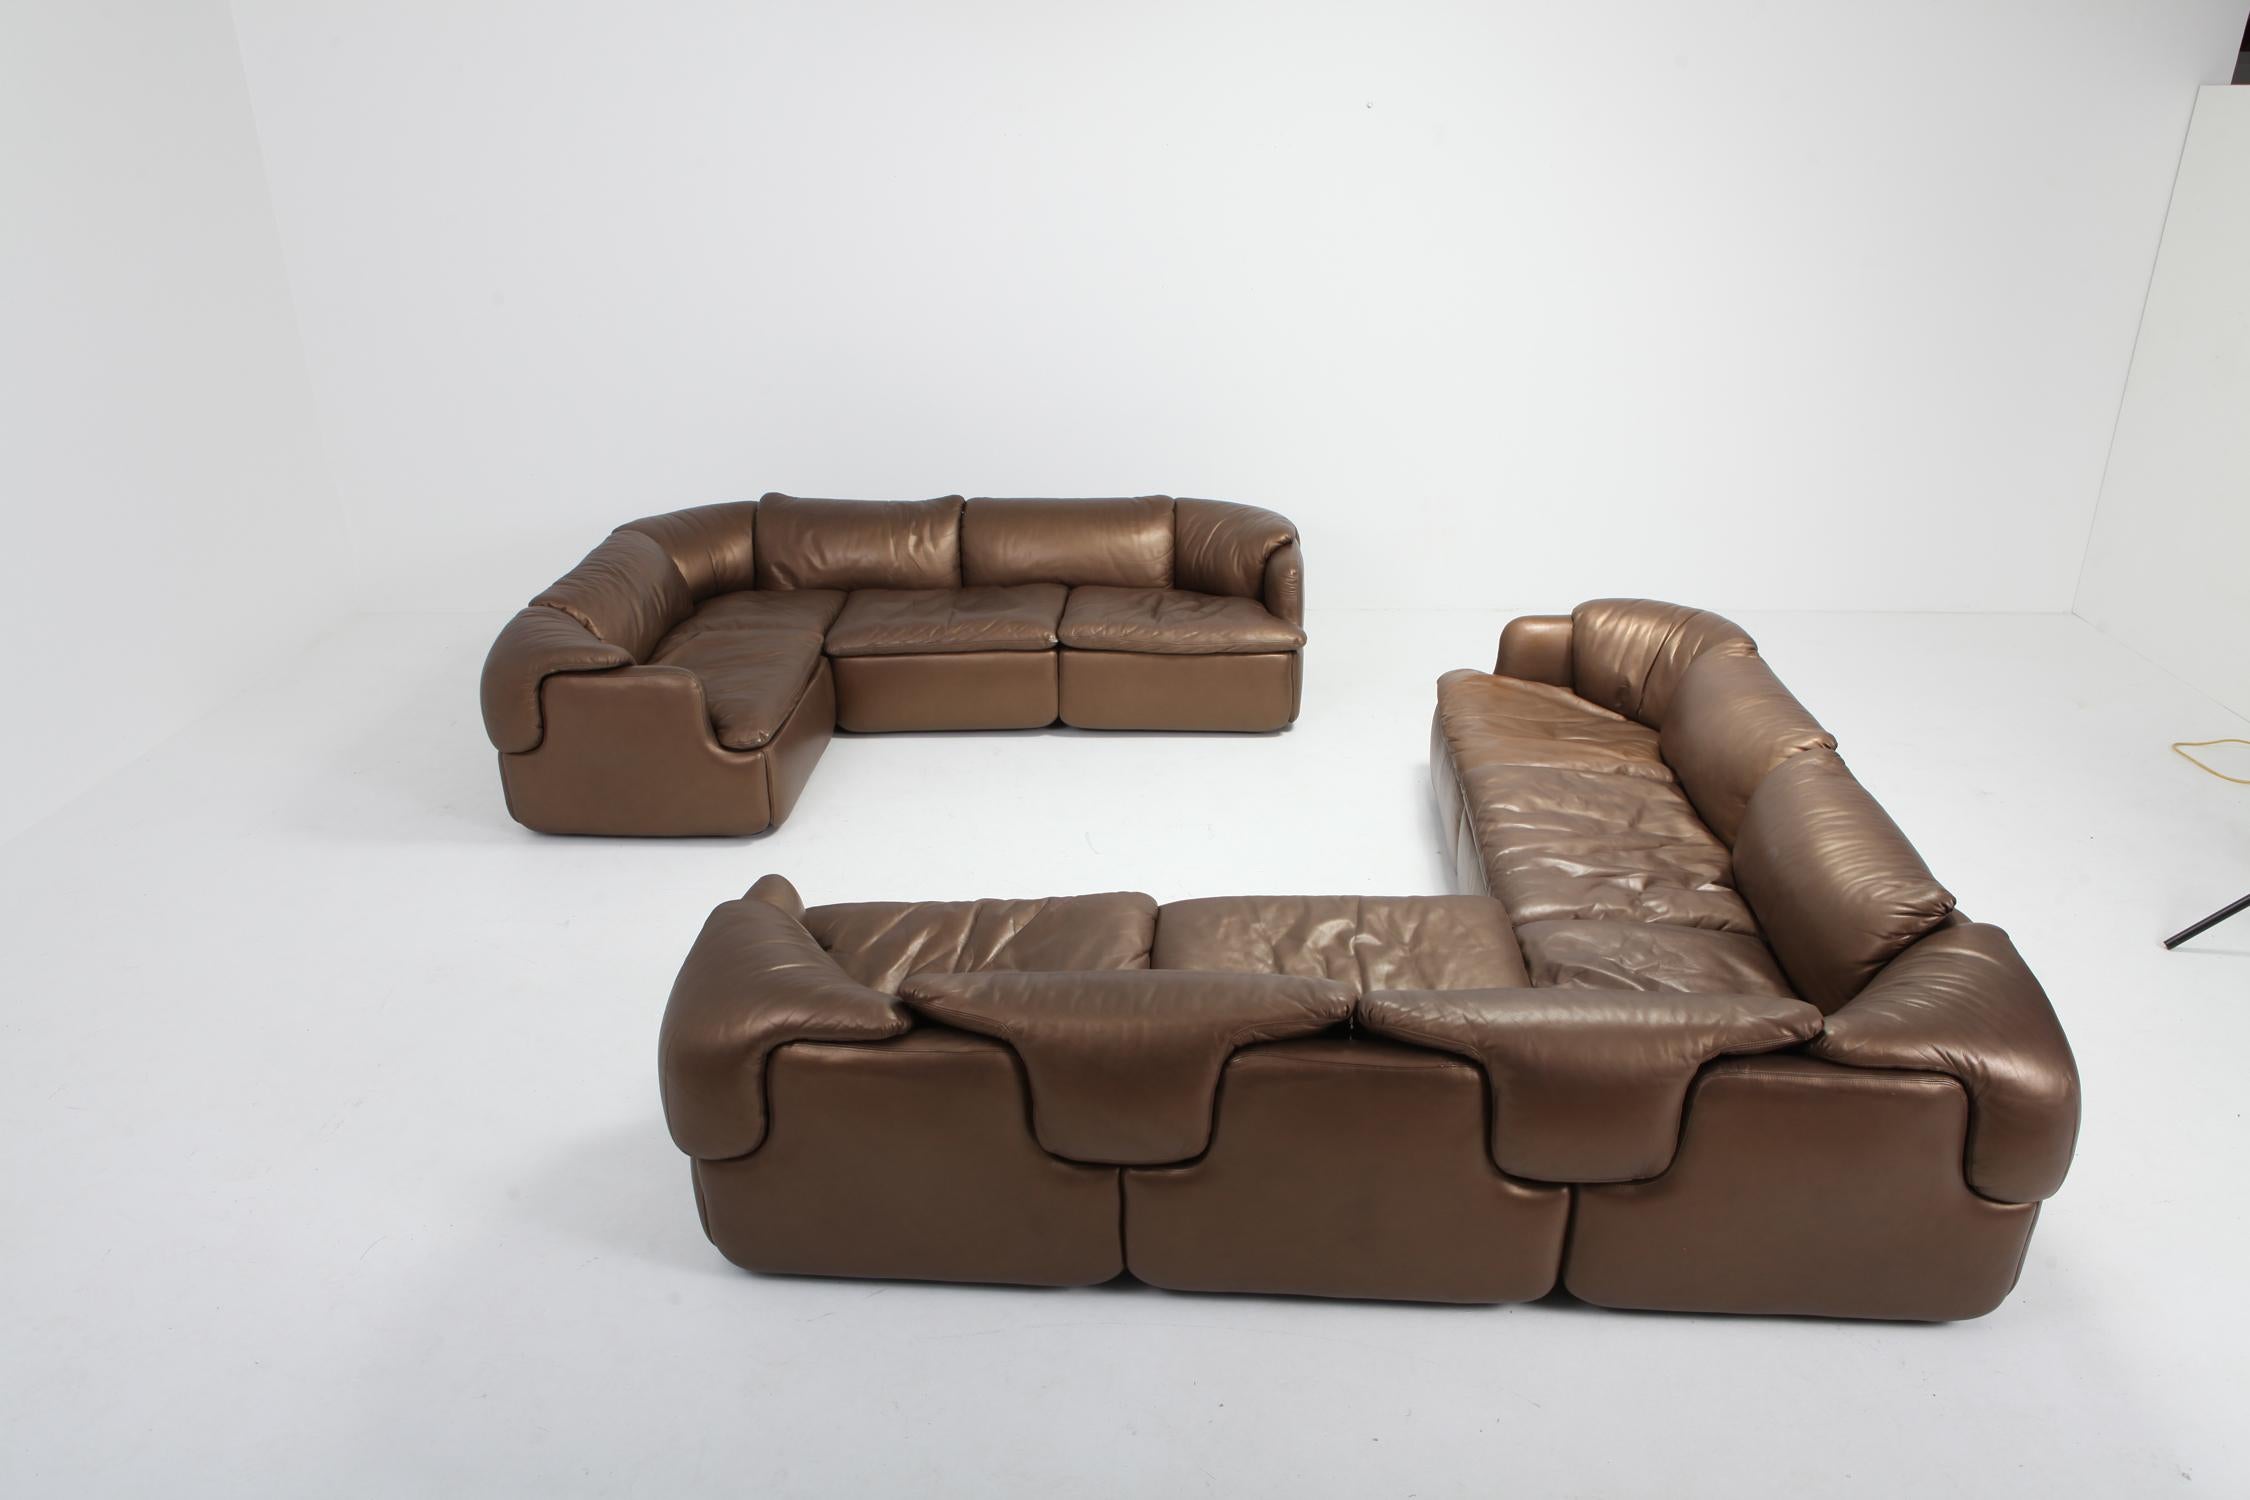 Bronze Leather Saporiti High-End Sectional Sofa 'Confidential' 2